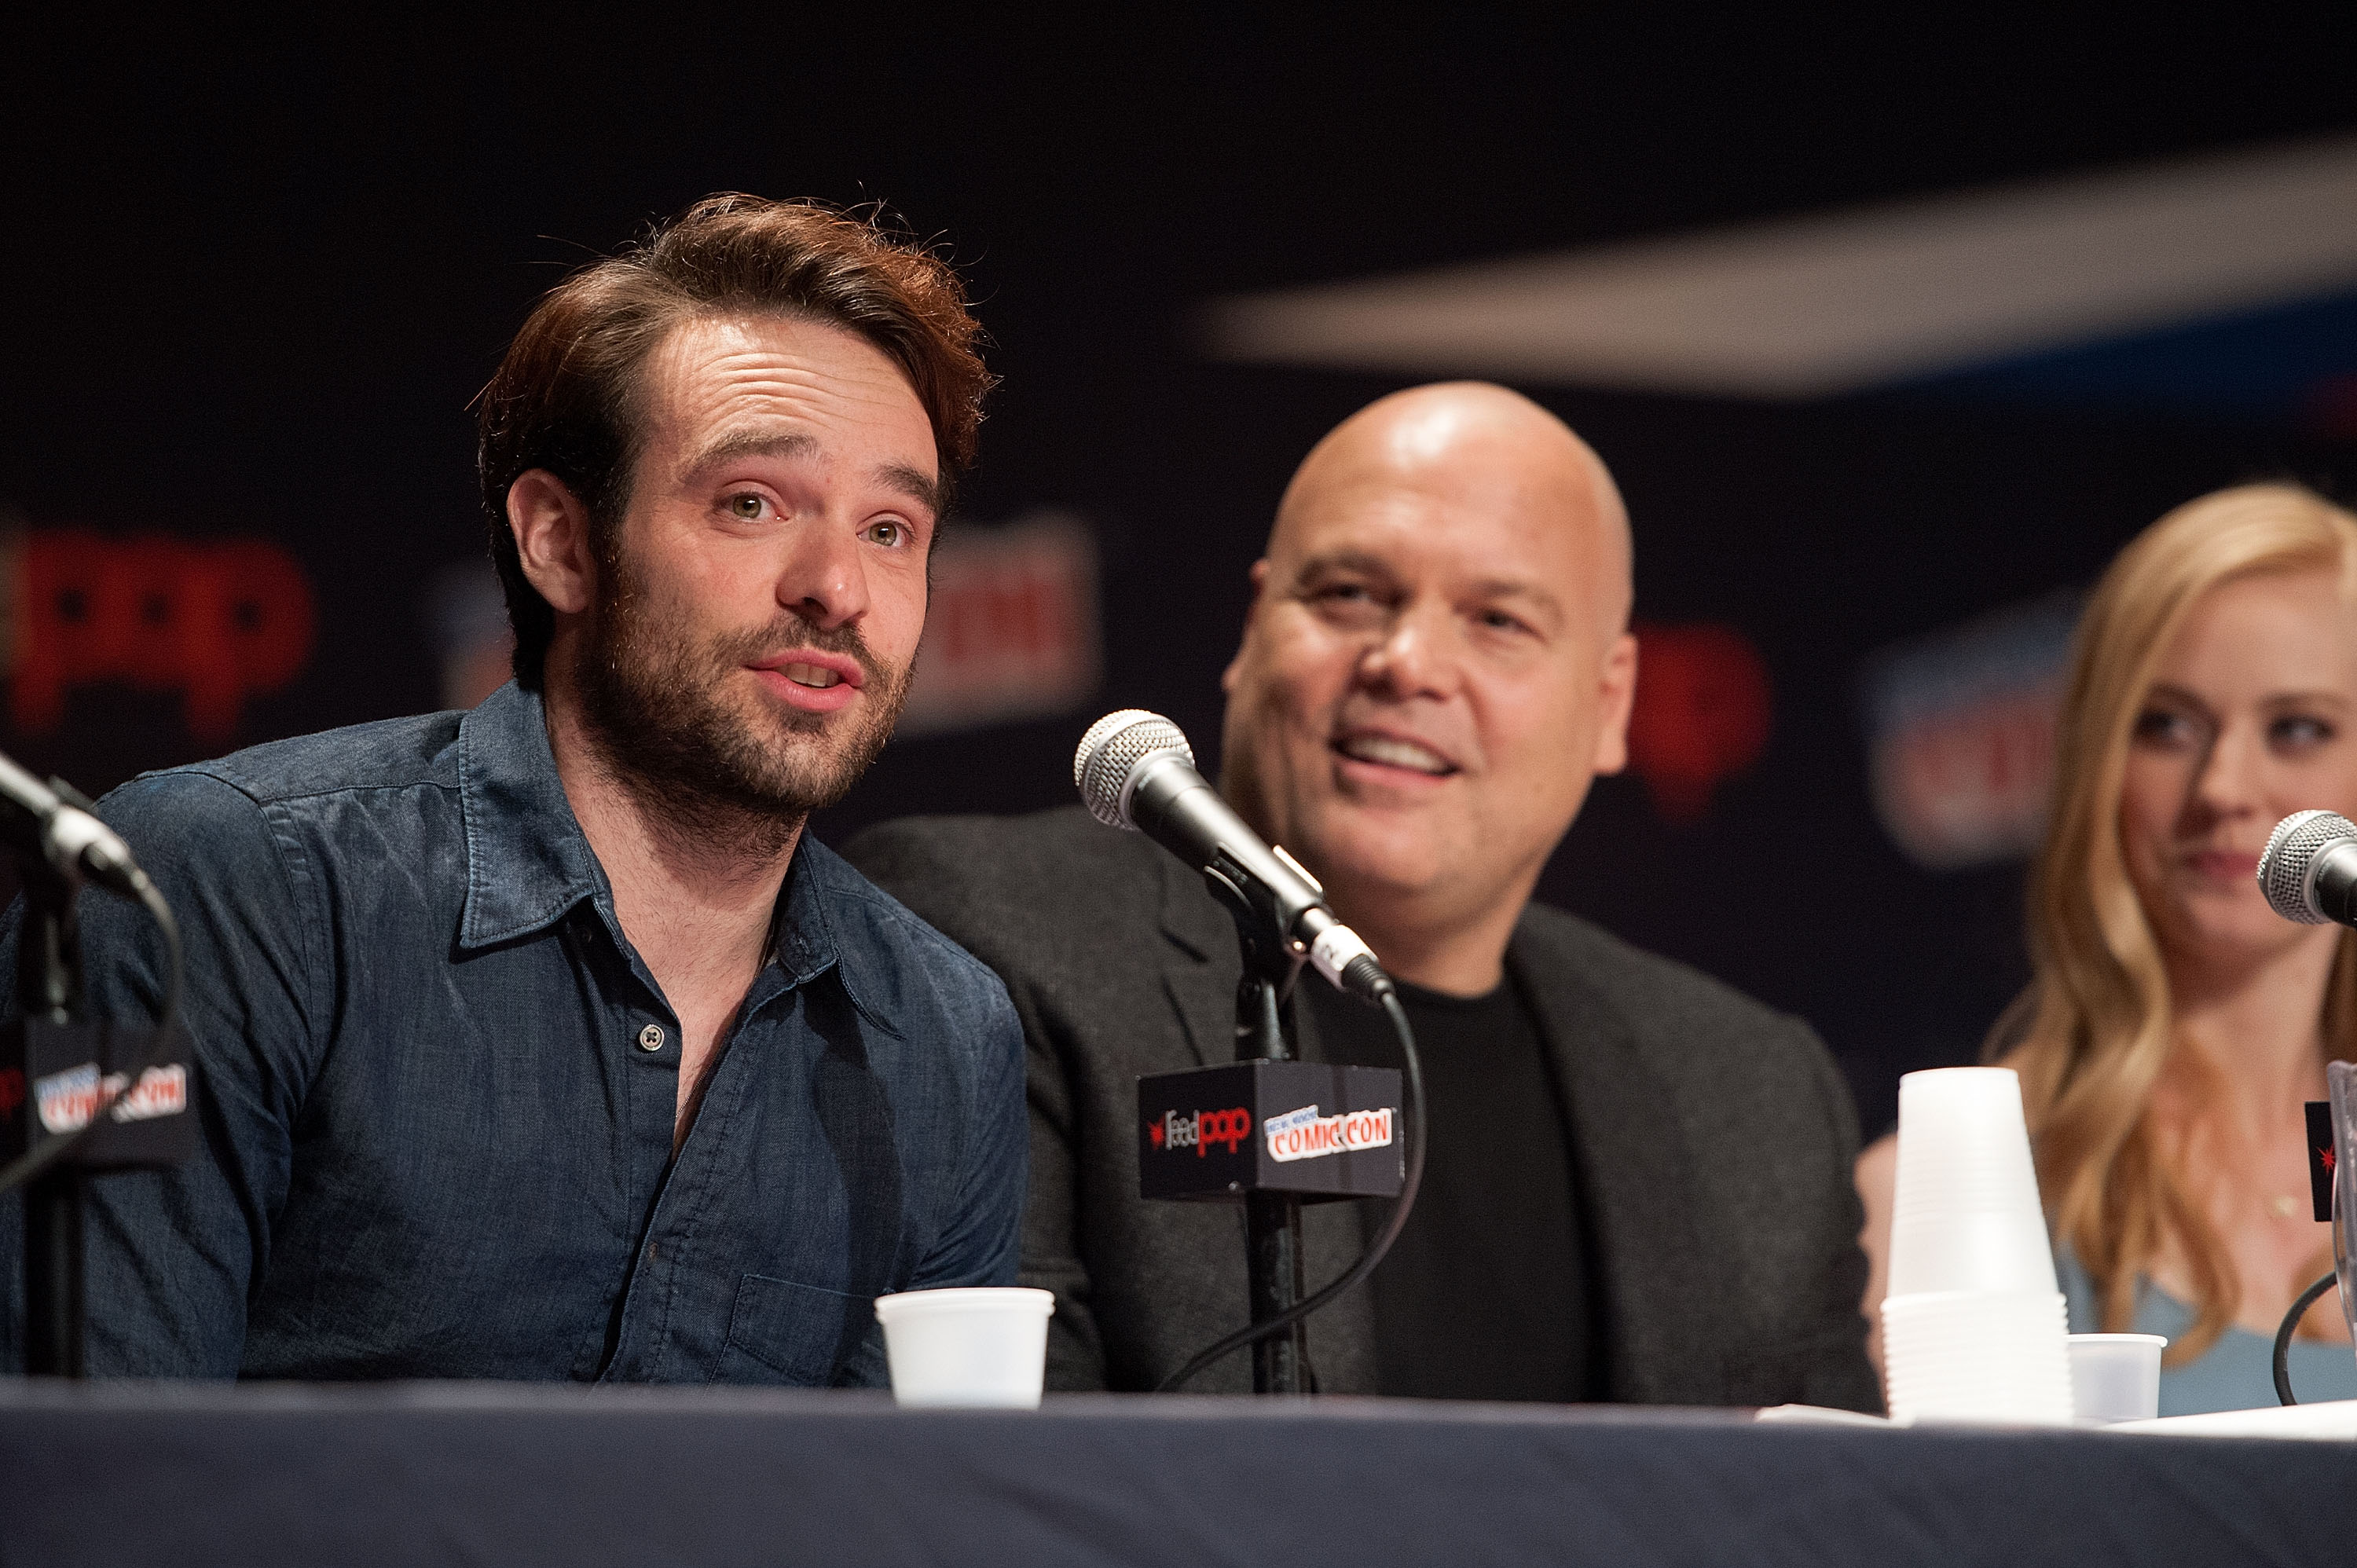 Charlie Cox, Vincent D'Onofrio, and Deborah Ann Woll, stars of 'Daredevil,' appear onstage at a panel. Cox wears a dark blue button-up shirt. D'Onofrio wears a dark gray suit over a black shirt. Woll wears a blue top.